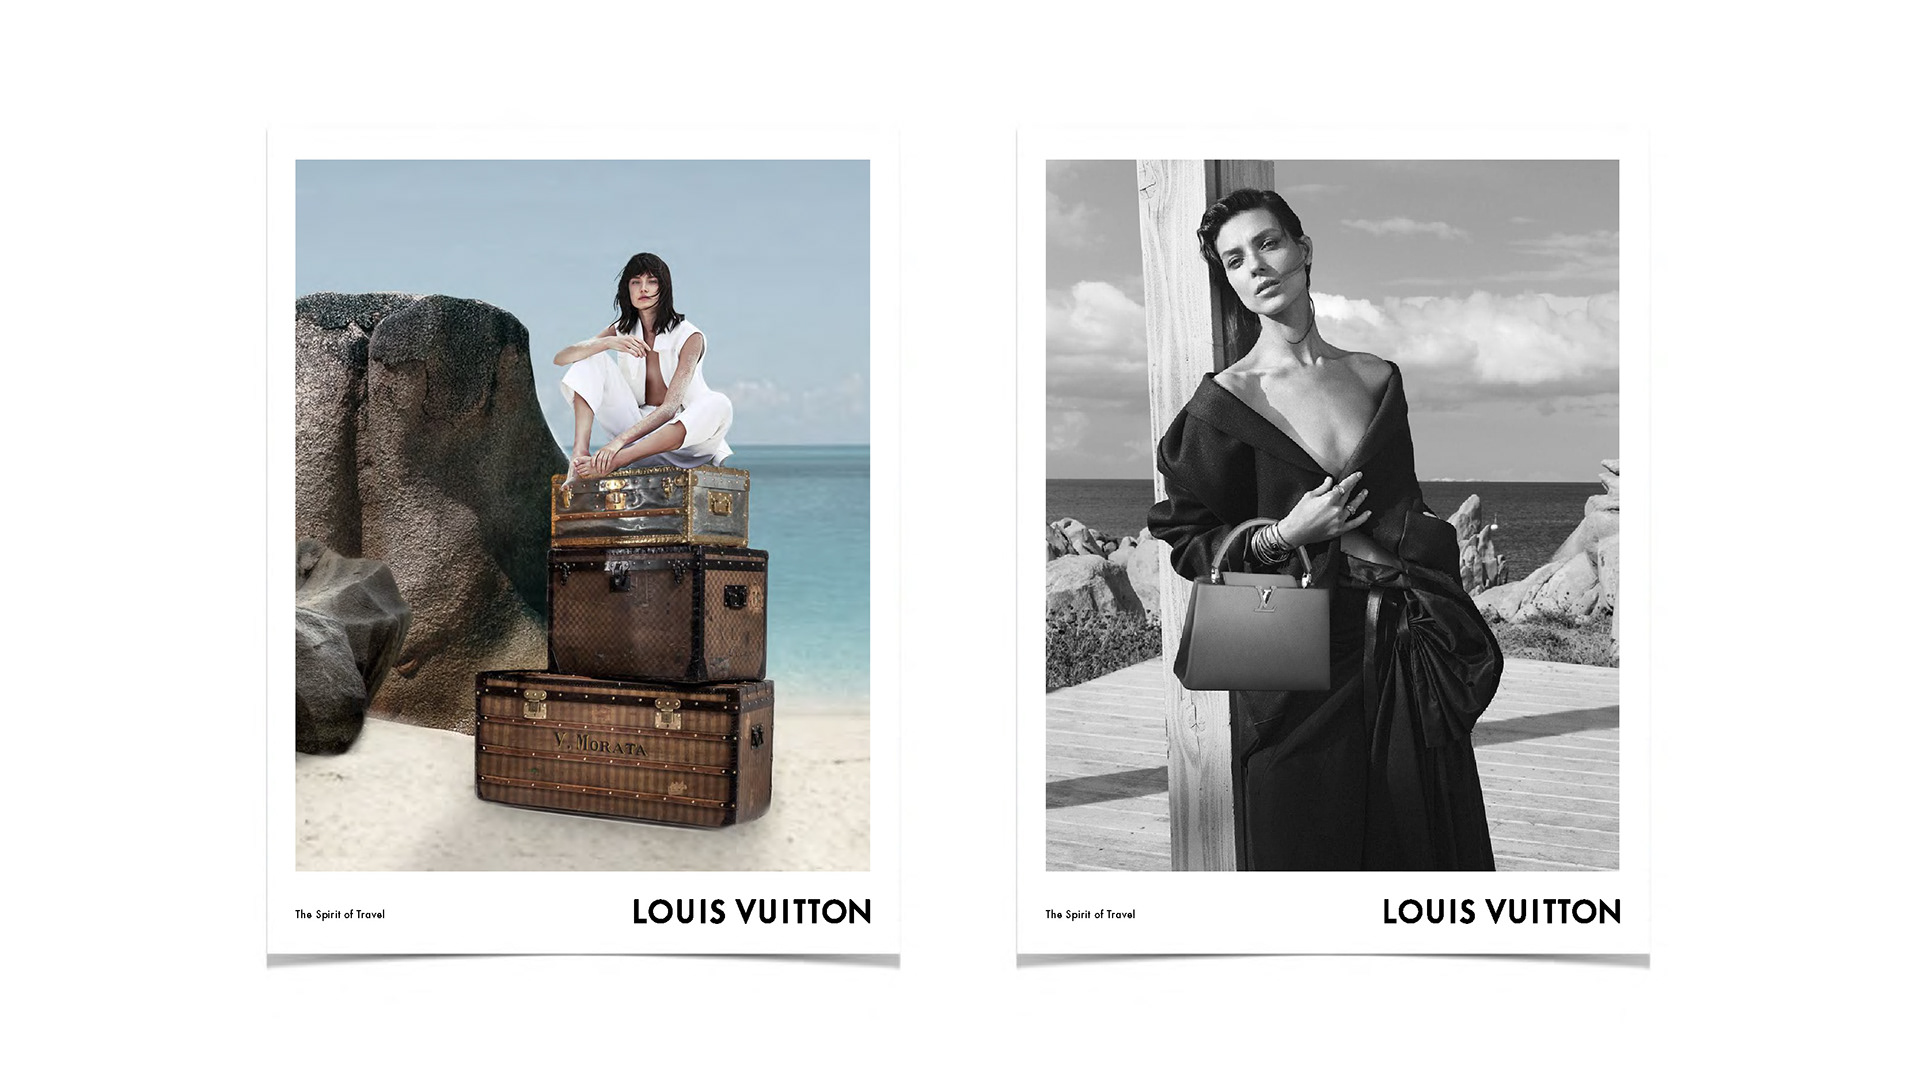 Louis Vuitton Cruise 2018 Campaign, The Spirit of Travel